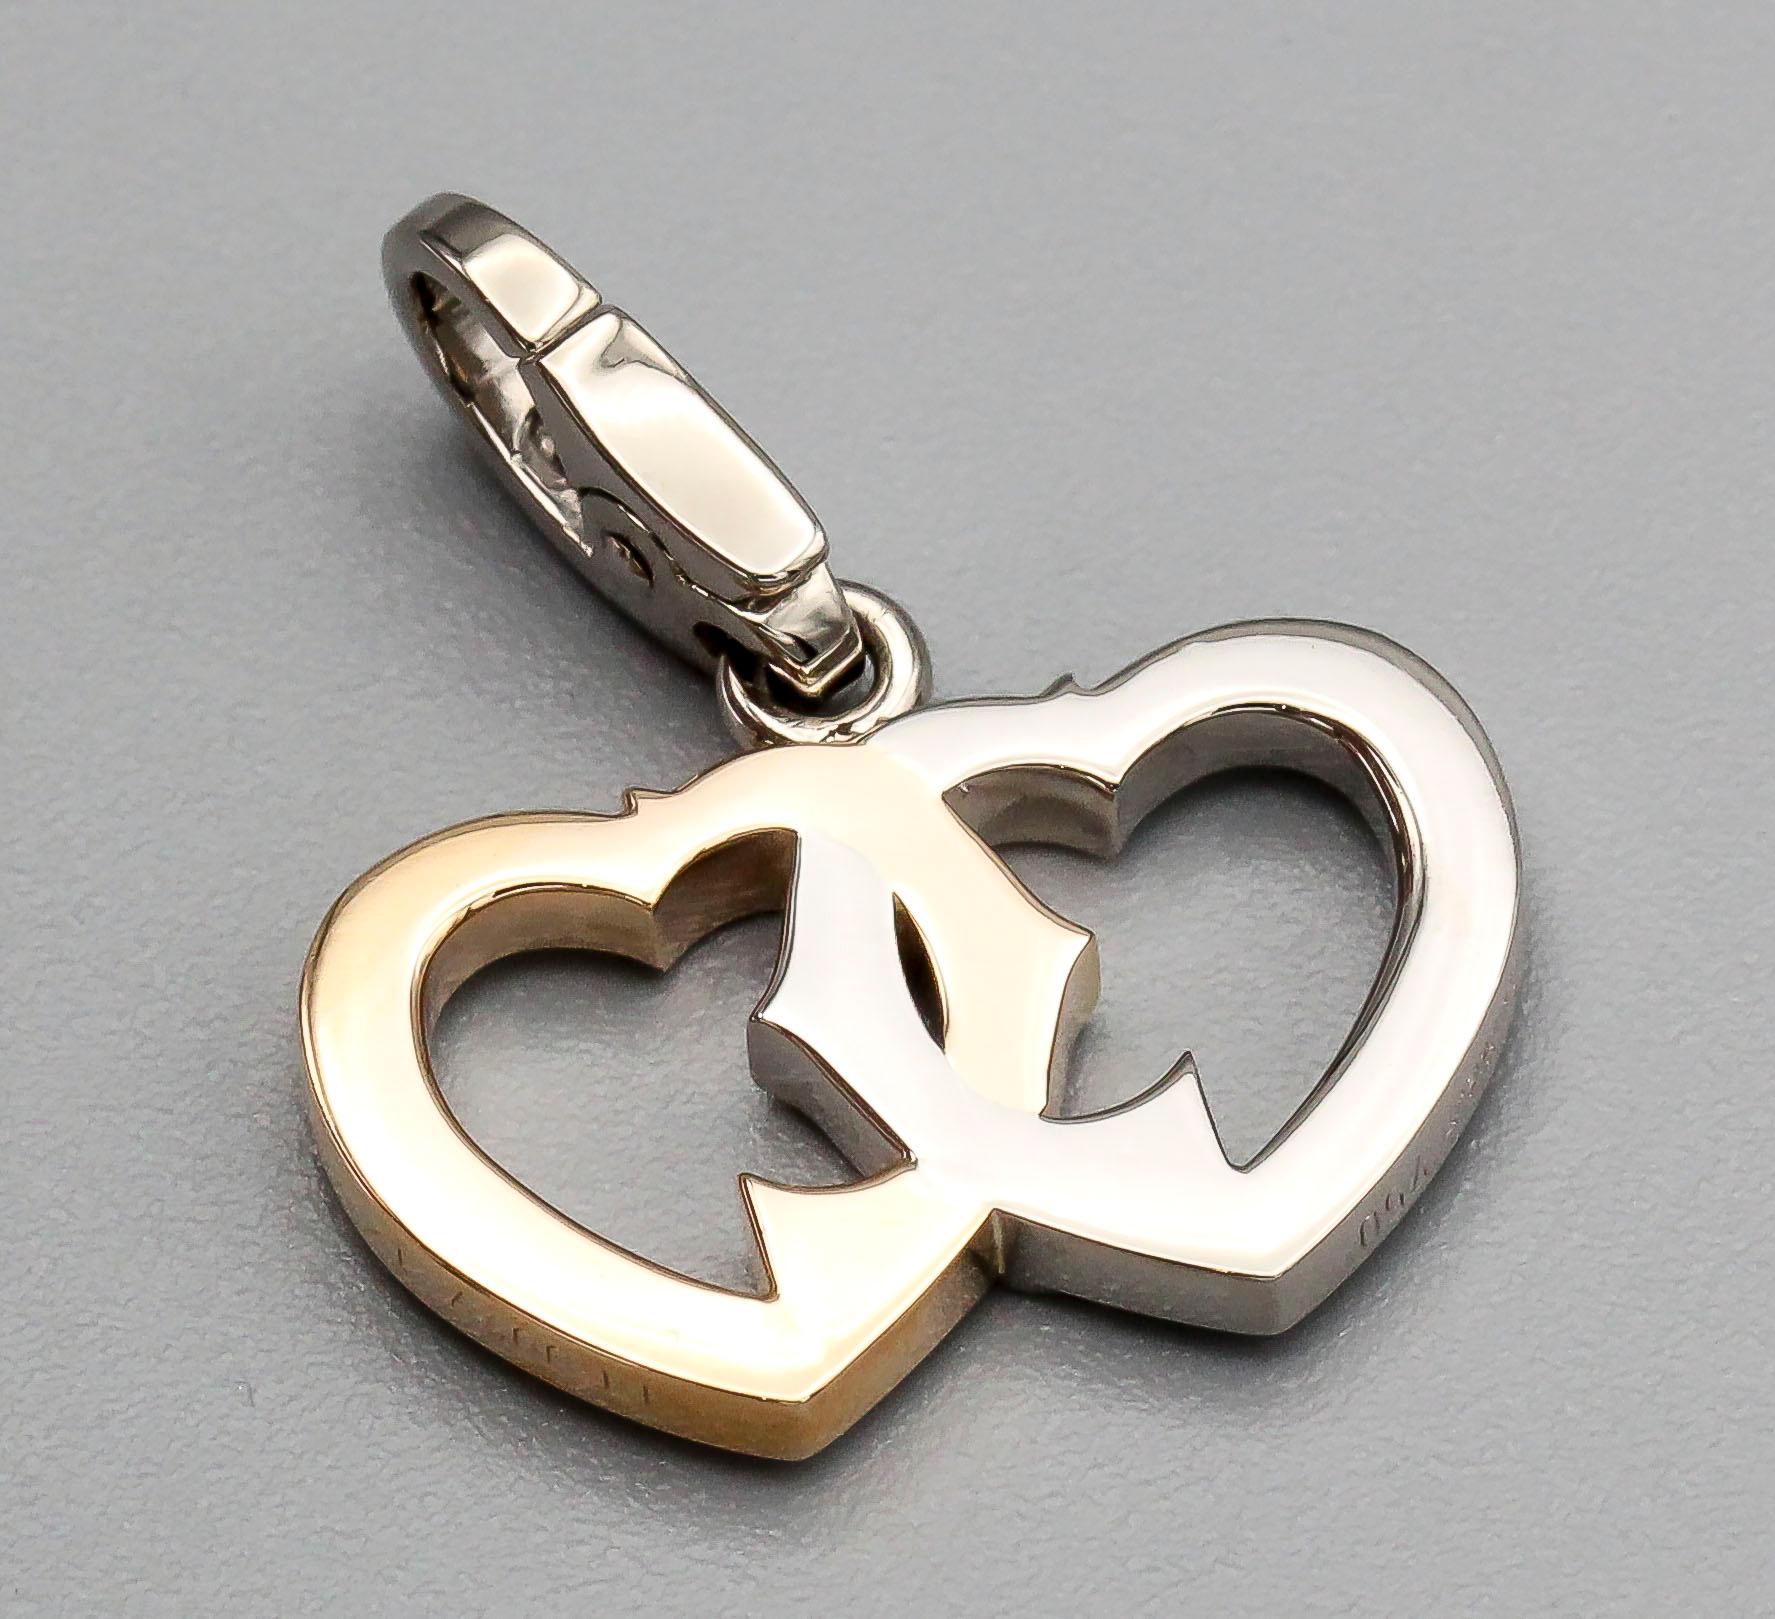 Fine 18k yellow and white gold intertwined double heart logo charm by Cartier.

Hallmarks: Cartier, 750, reference numbers, maker's mark.